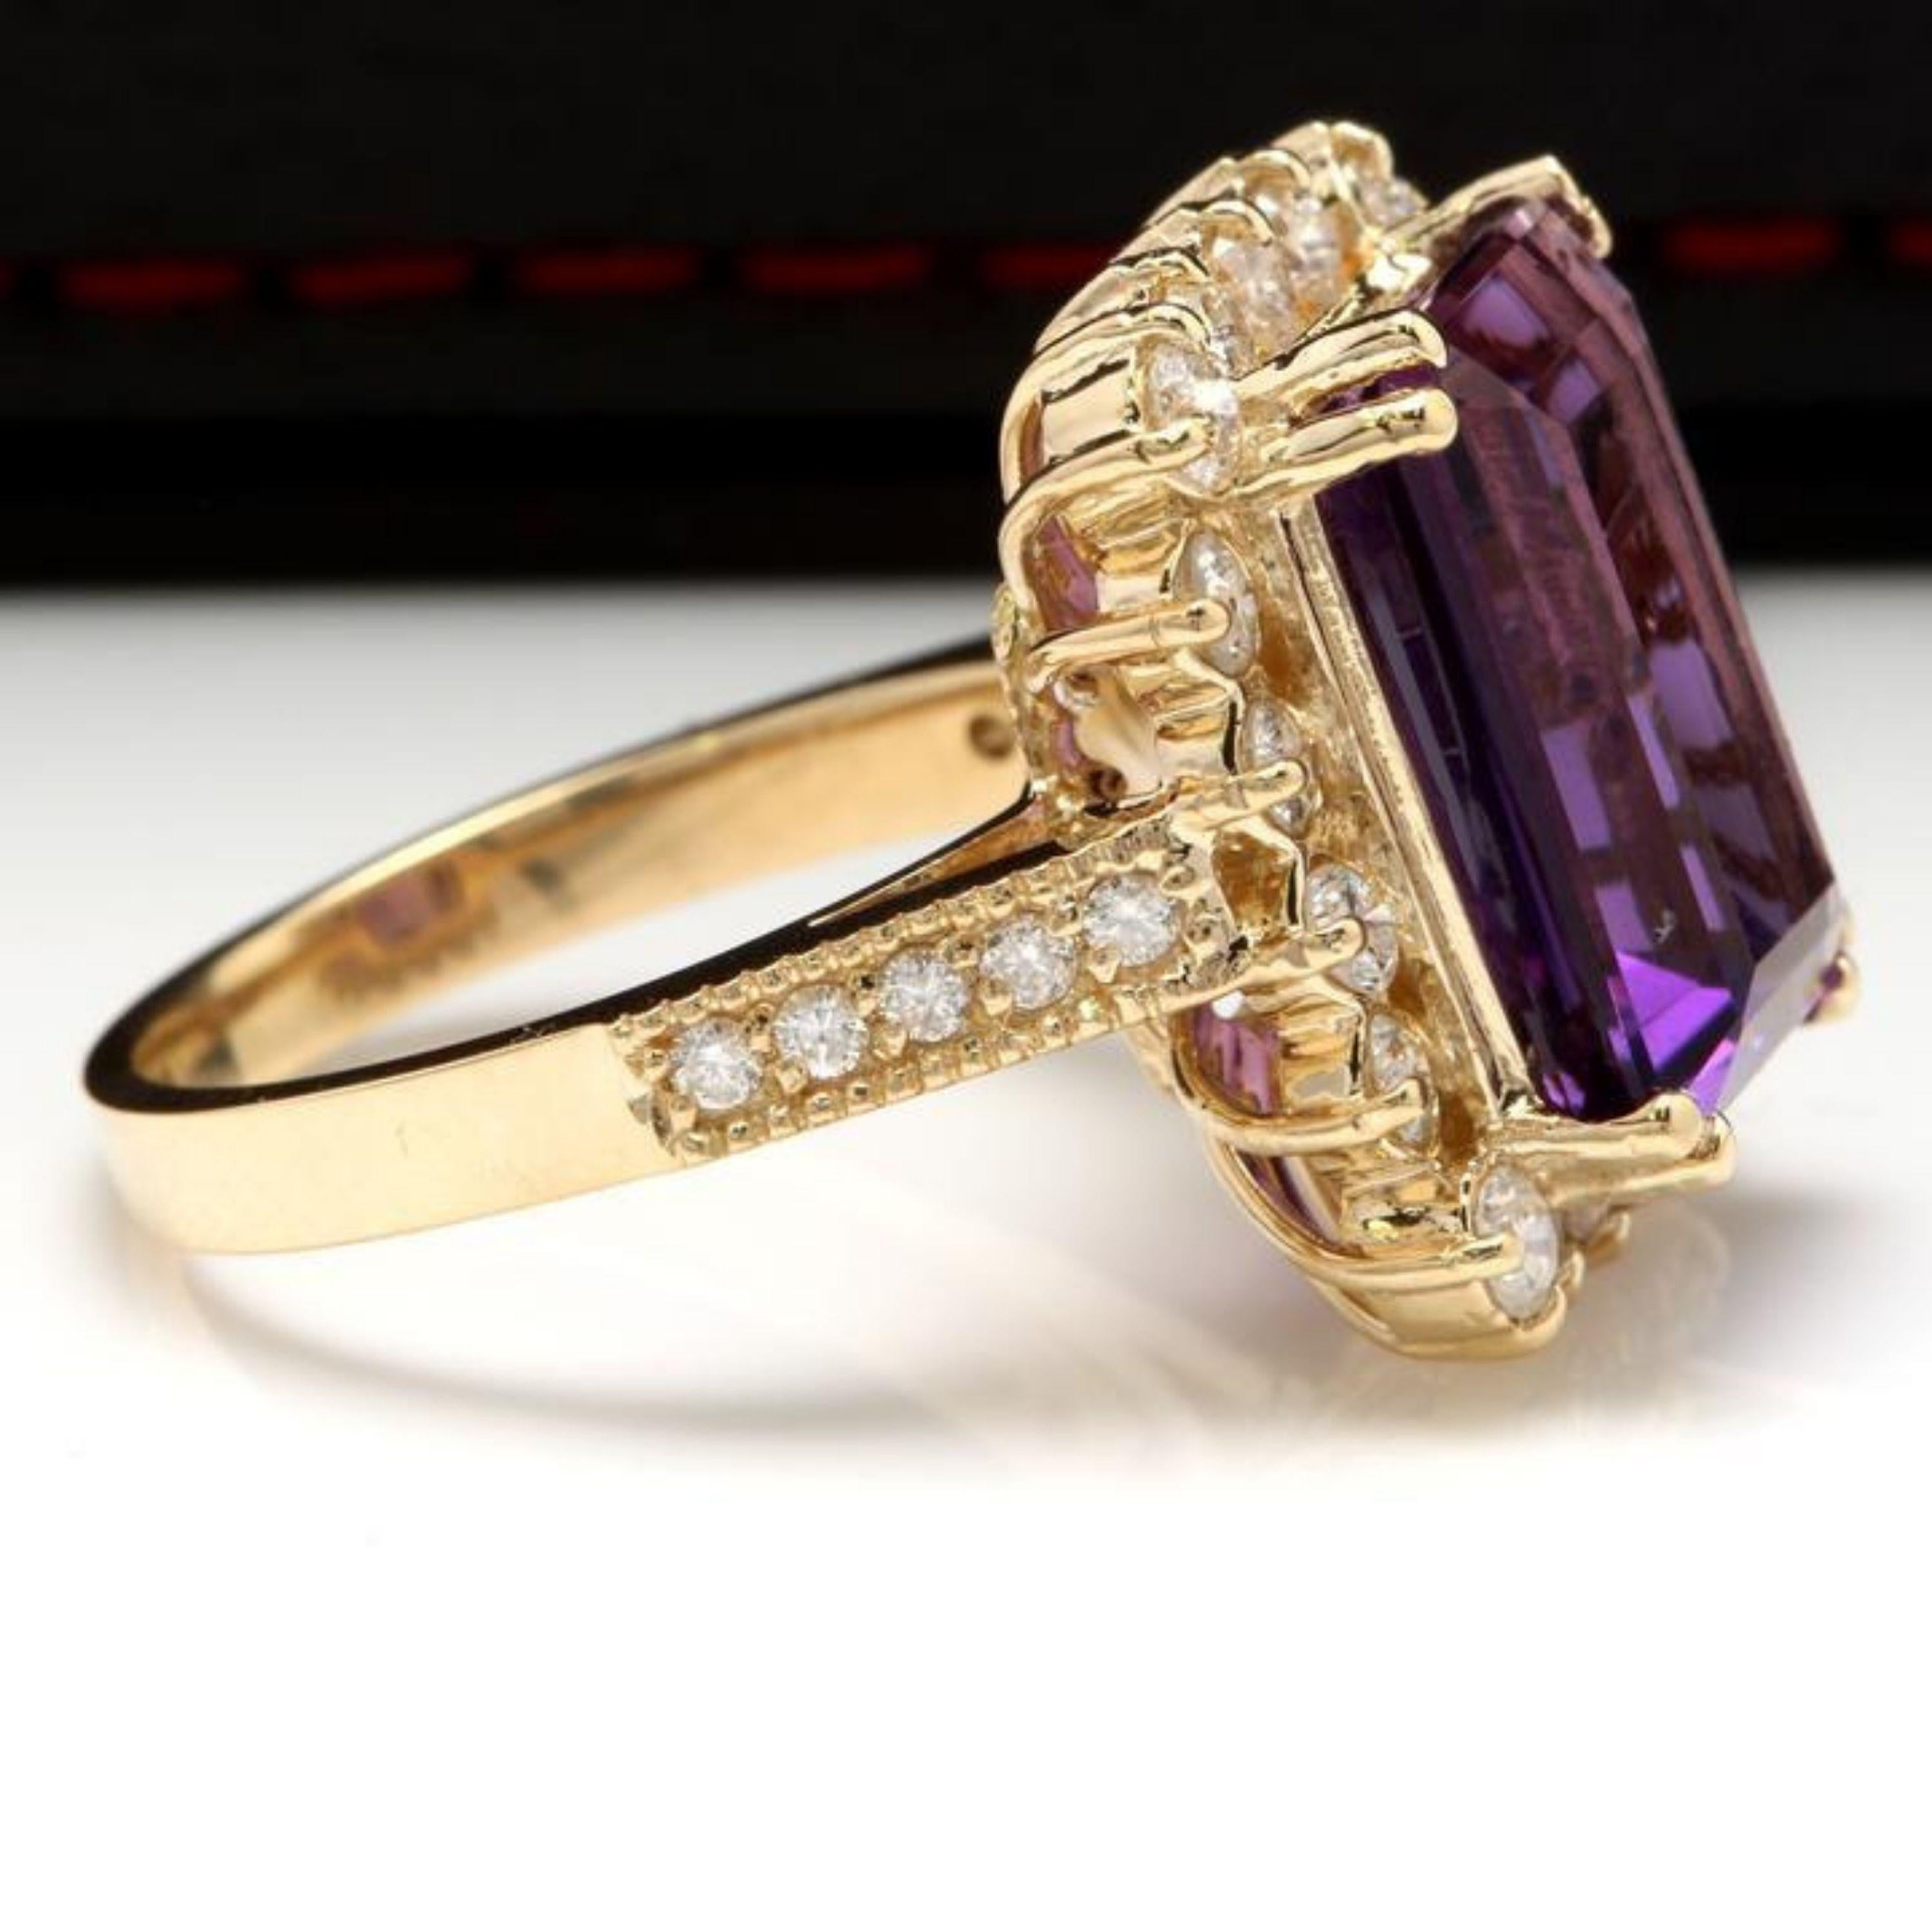 8.65 Carats Natural Amethyst and Diamond 14K Solid Yellow Gold Ring

Total Natural Emerald Cut Amethyst Weights: Approx. 7.50 Carats

Amethyst Measures: Approx. 14.16 x 10.16mm

Natural Round Diamonds Weight: Approx. 1.15 Carats (color G-H / Clarity